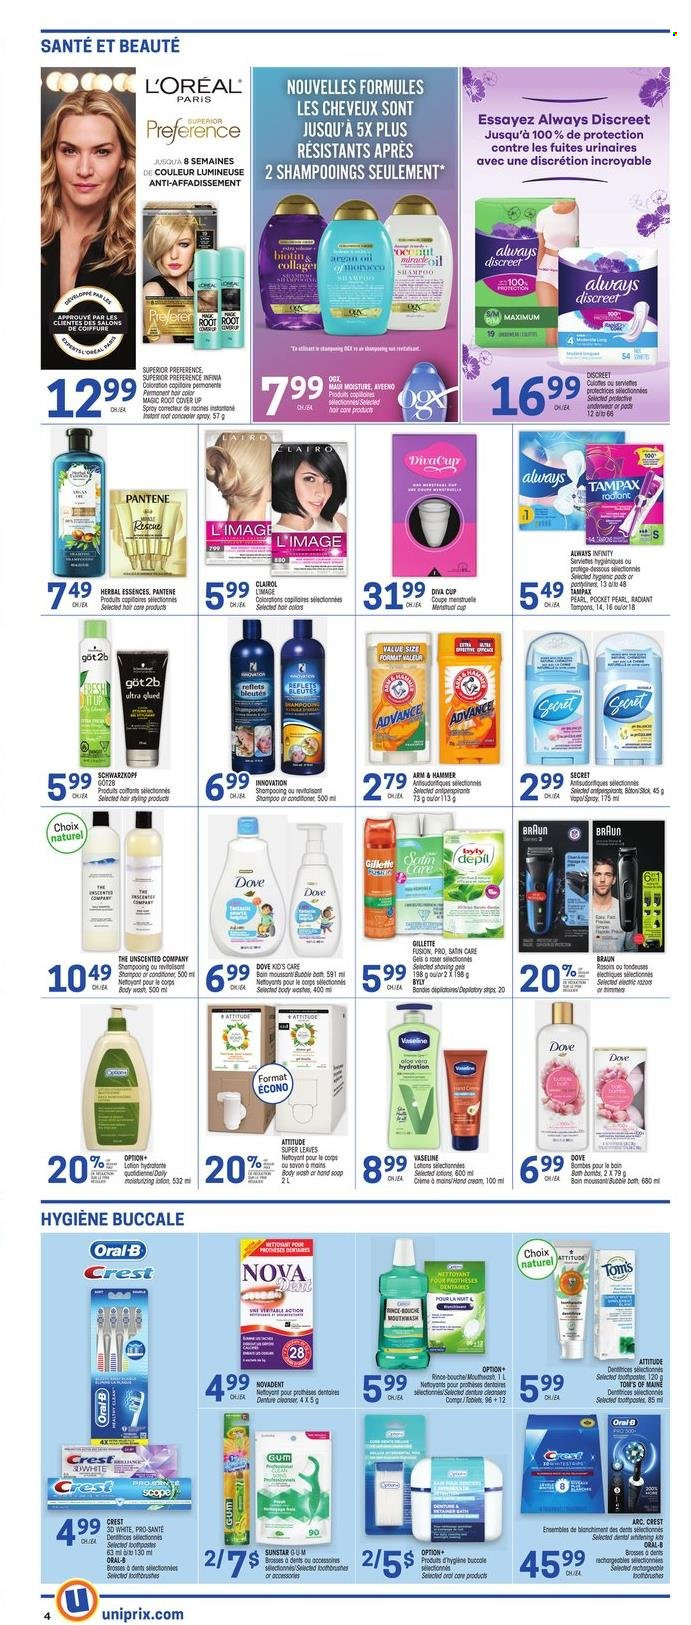 thumbnail - Uniprix Flyer - February 09, 2023 - February 15, 2023 - Sales products - Dove, ARM & HAMMER, Aveeno, body wash, hand soap, Vaseline, Mousson, soap, toothpaste, mouthwash, Crest, Always Discreet, tampons, Always Infinity, cleanser, Gillette, L’Oréal, OGX, Clairol, conditioner, Pantene, hair color, Herbal Essences, body lotion, corrector, argan oil, Braun, shampoo, Tampax, Oral-B, Schwarzkopf. Page 4.